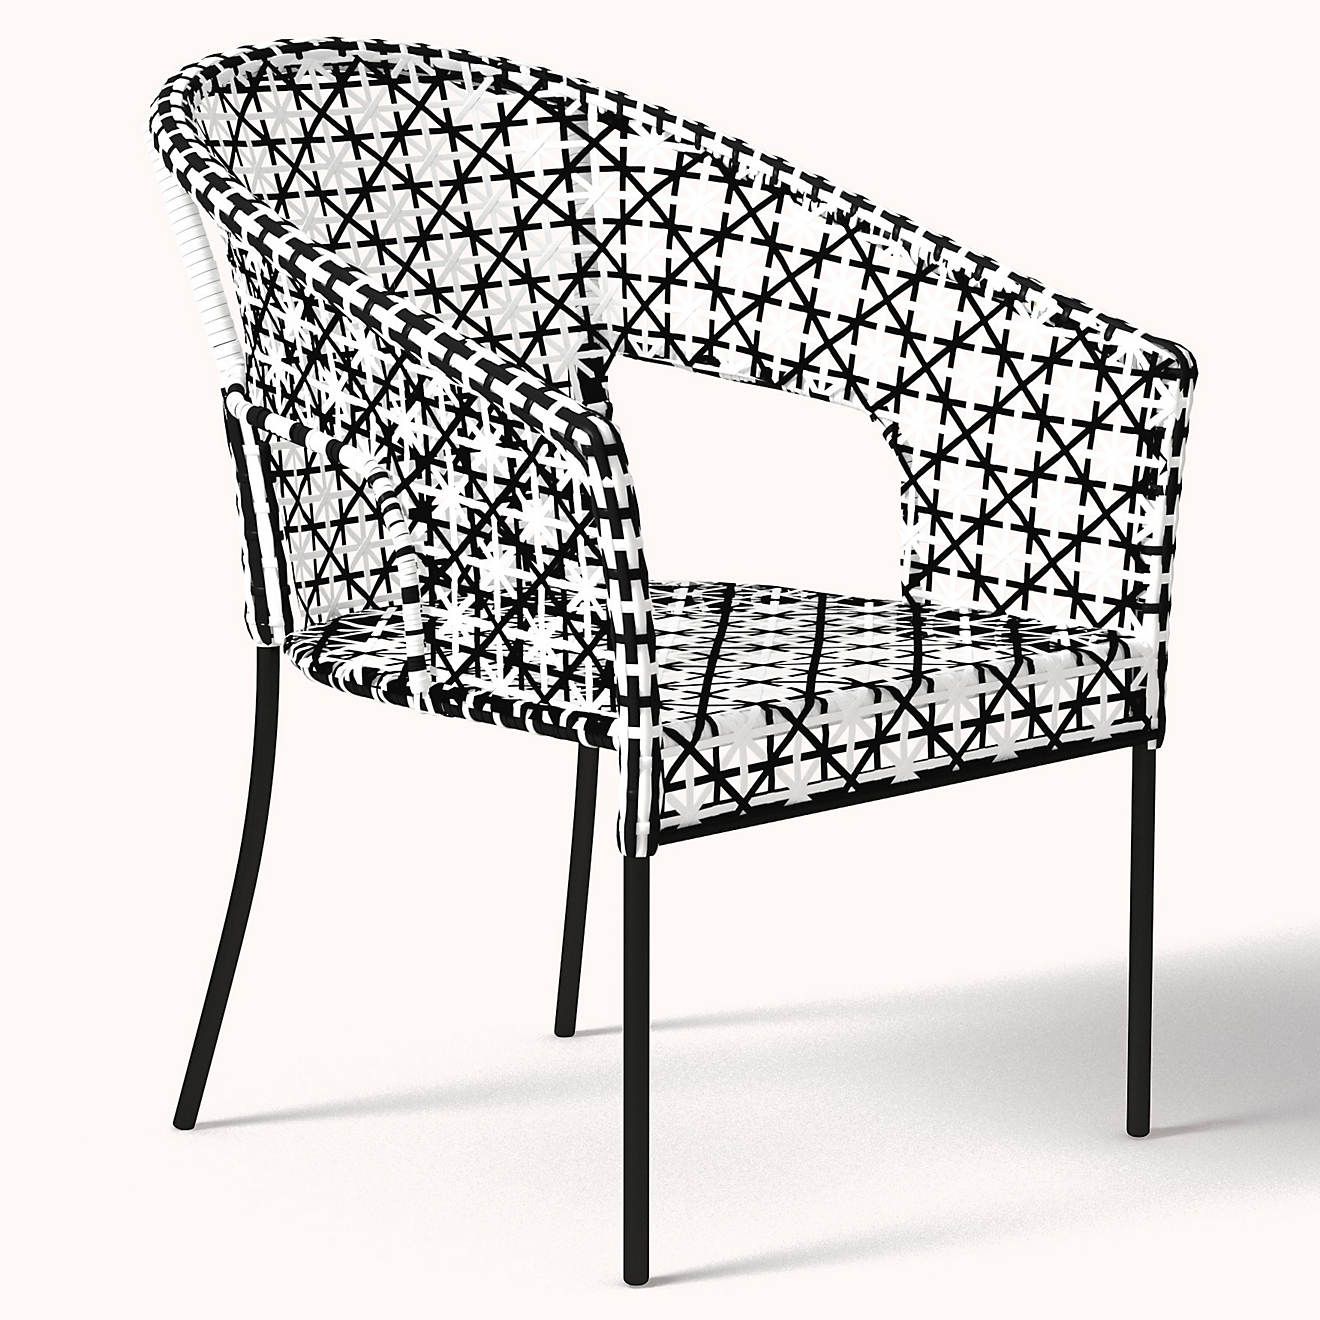 Mosaic Traditional Flower Chair | Academy | Academy Sports + Outdoors